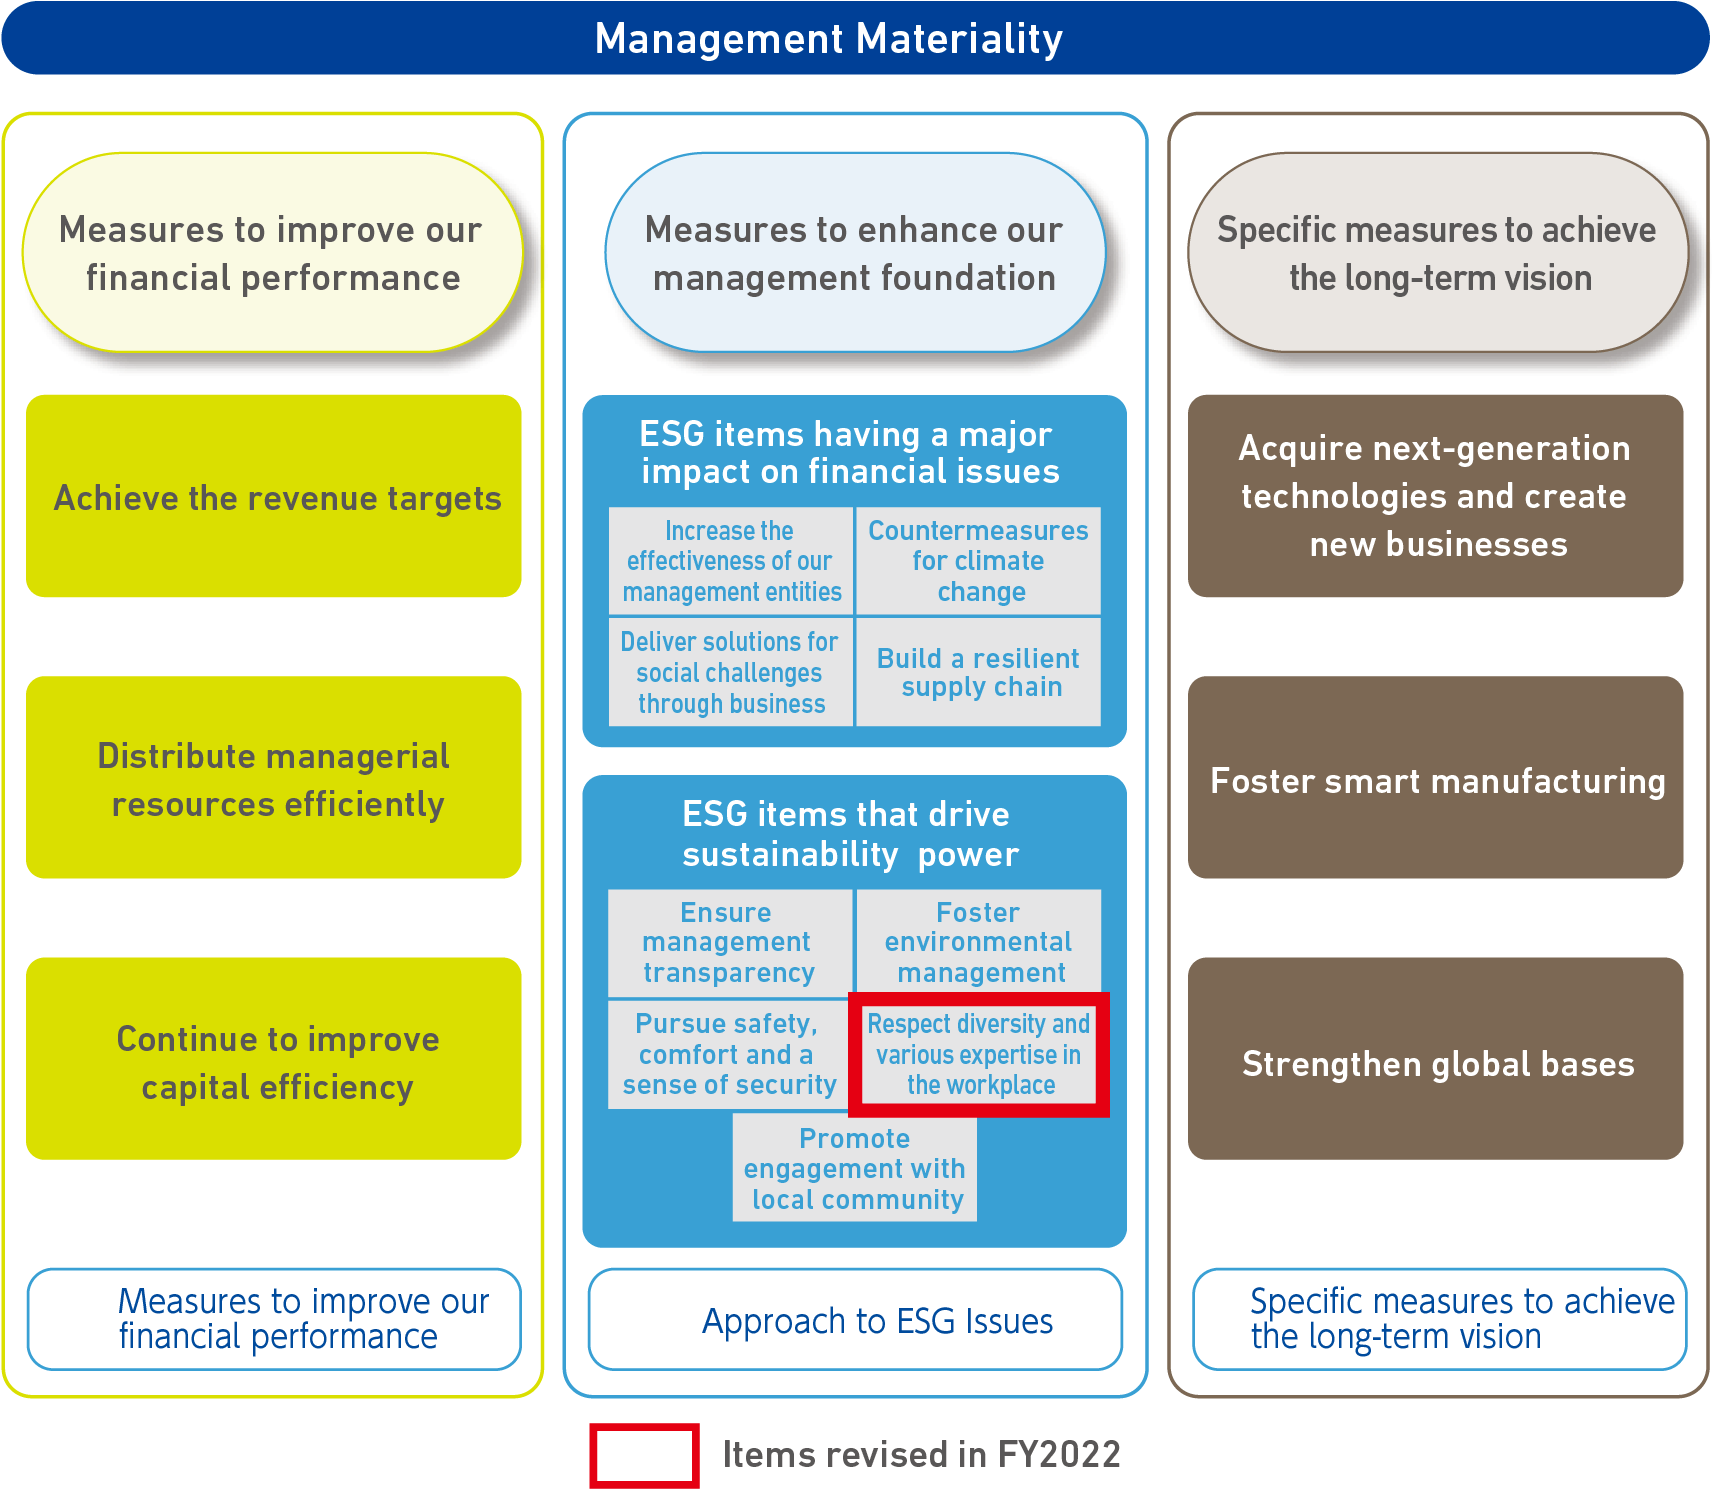 Structure of Our Management Materiality